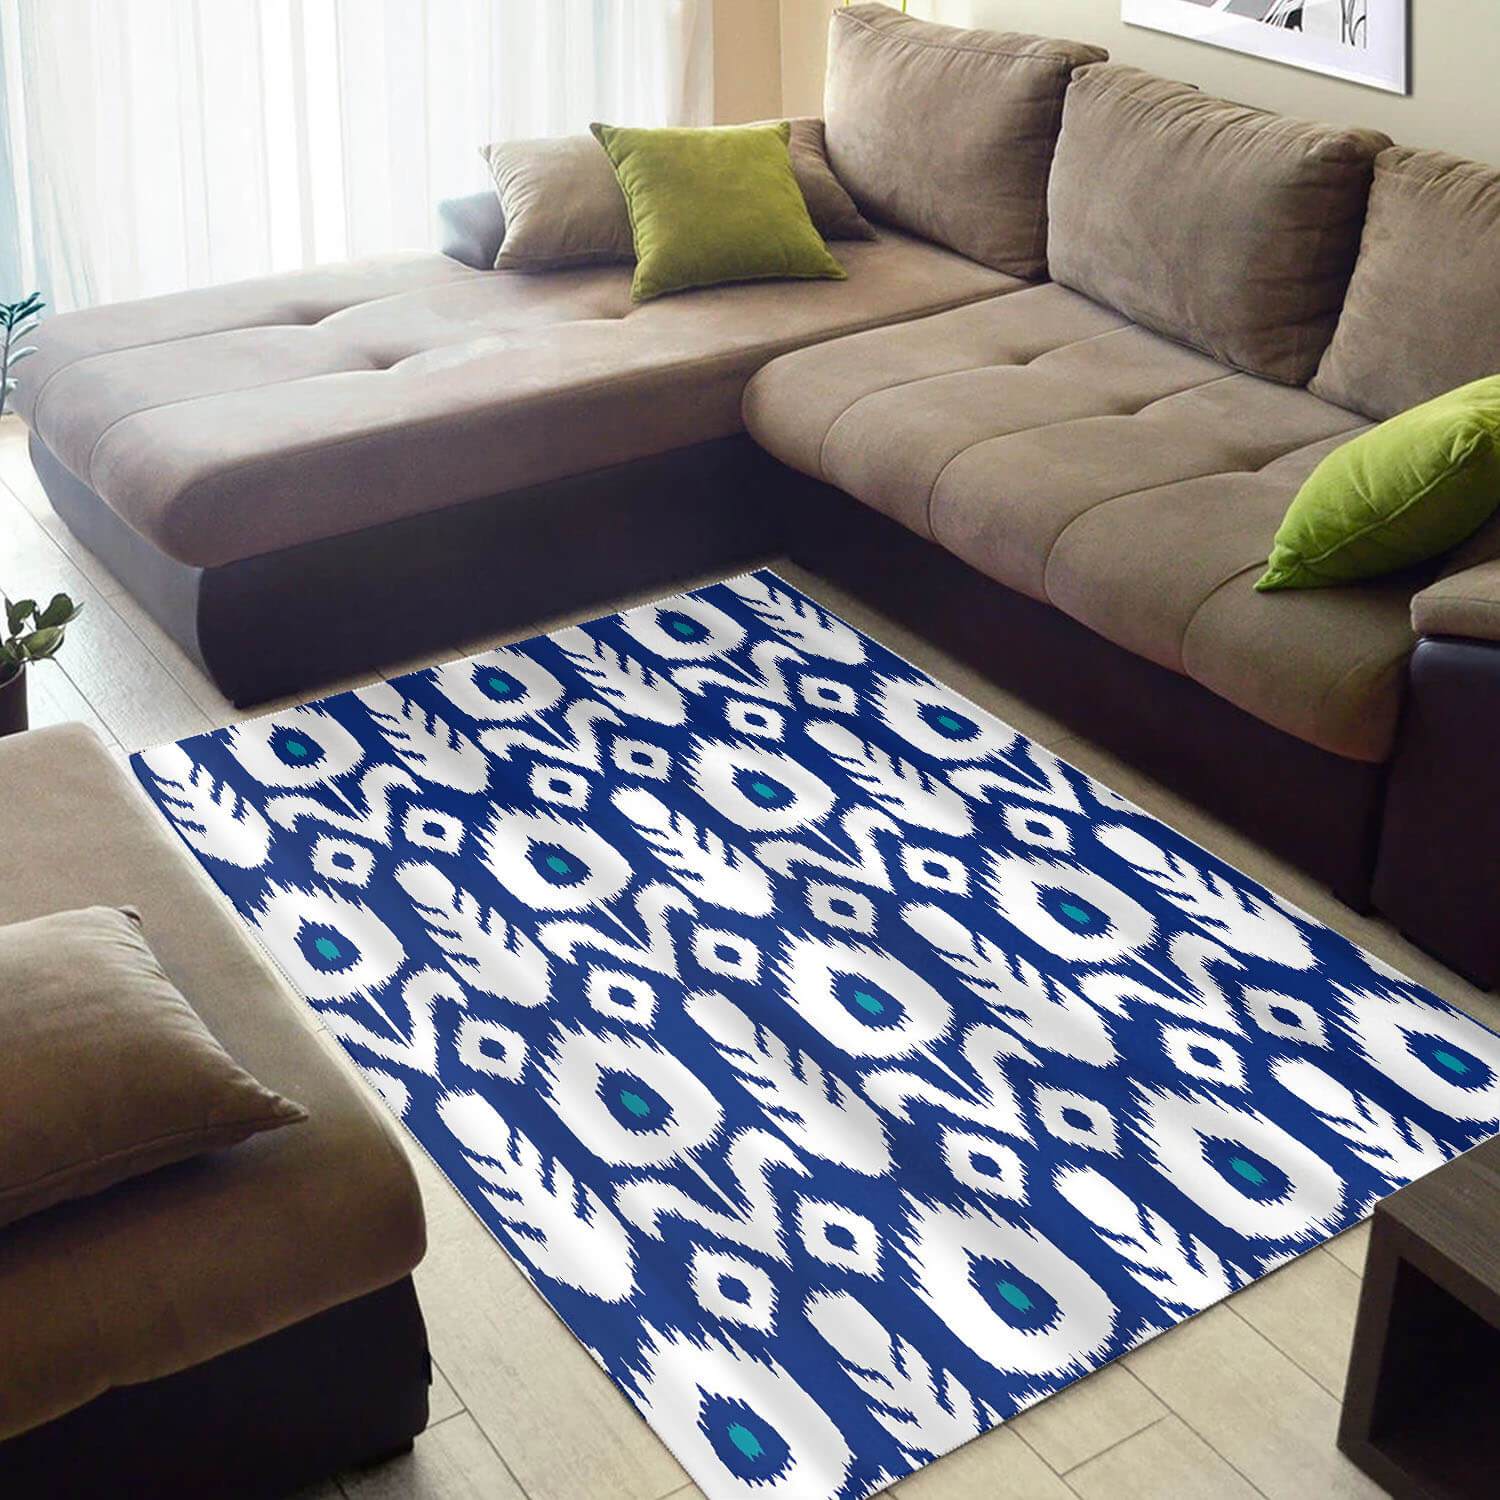 Modern African Style Retro American Art Afrocentric Themed Carpet Living Room Rug